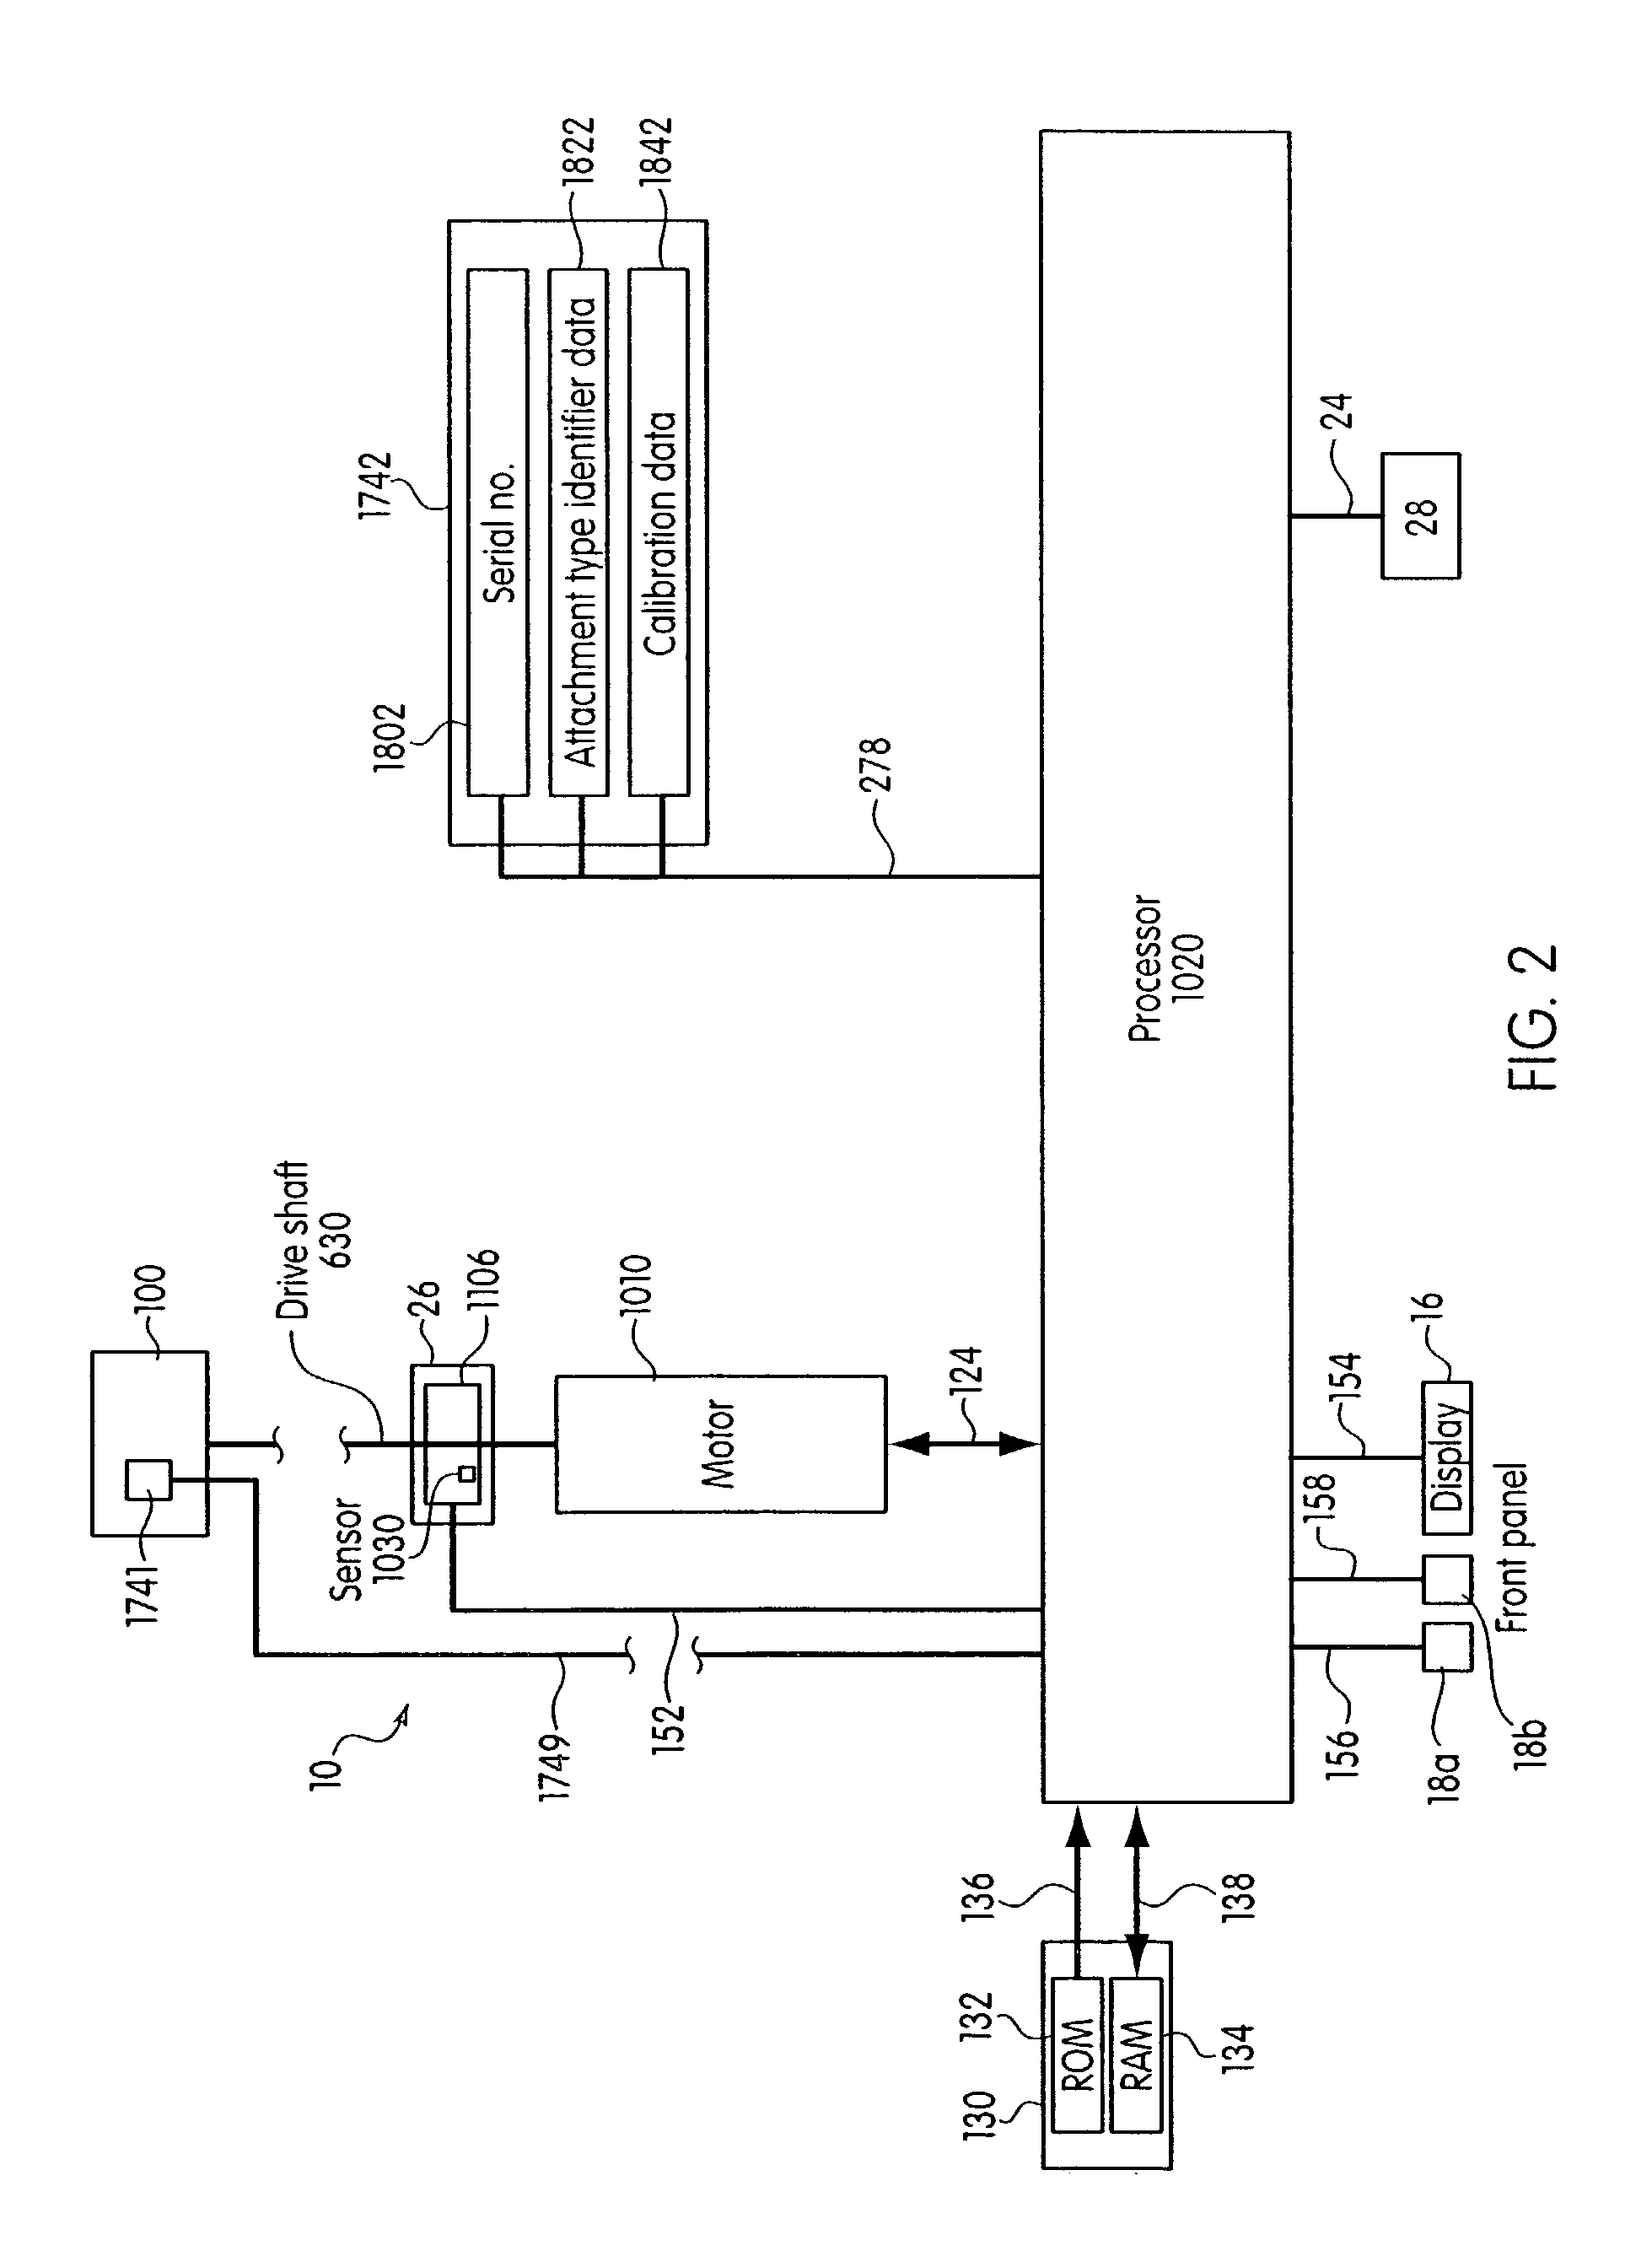 System and method for calibrating a surgical instrument